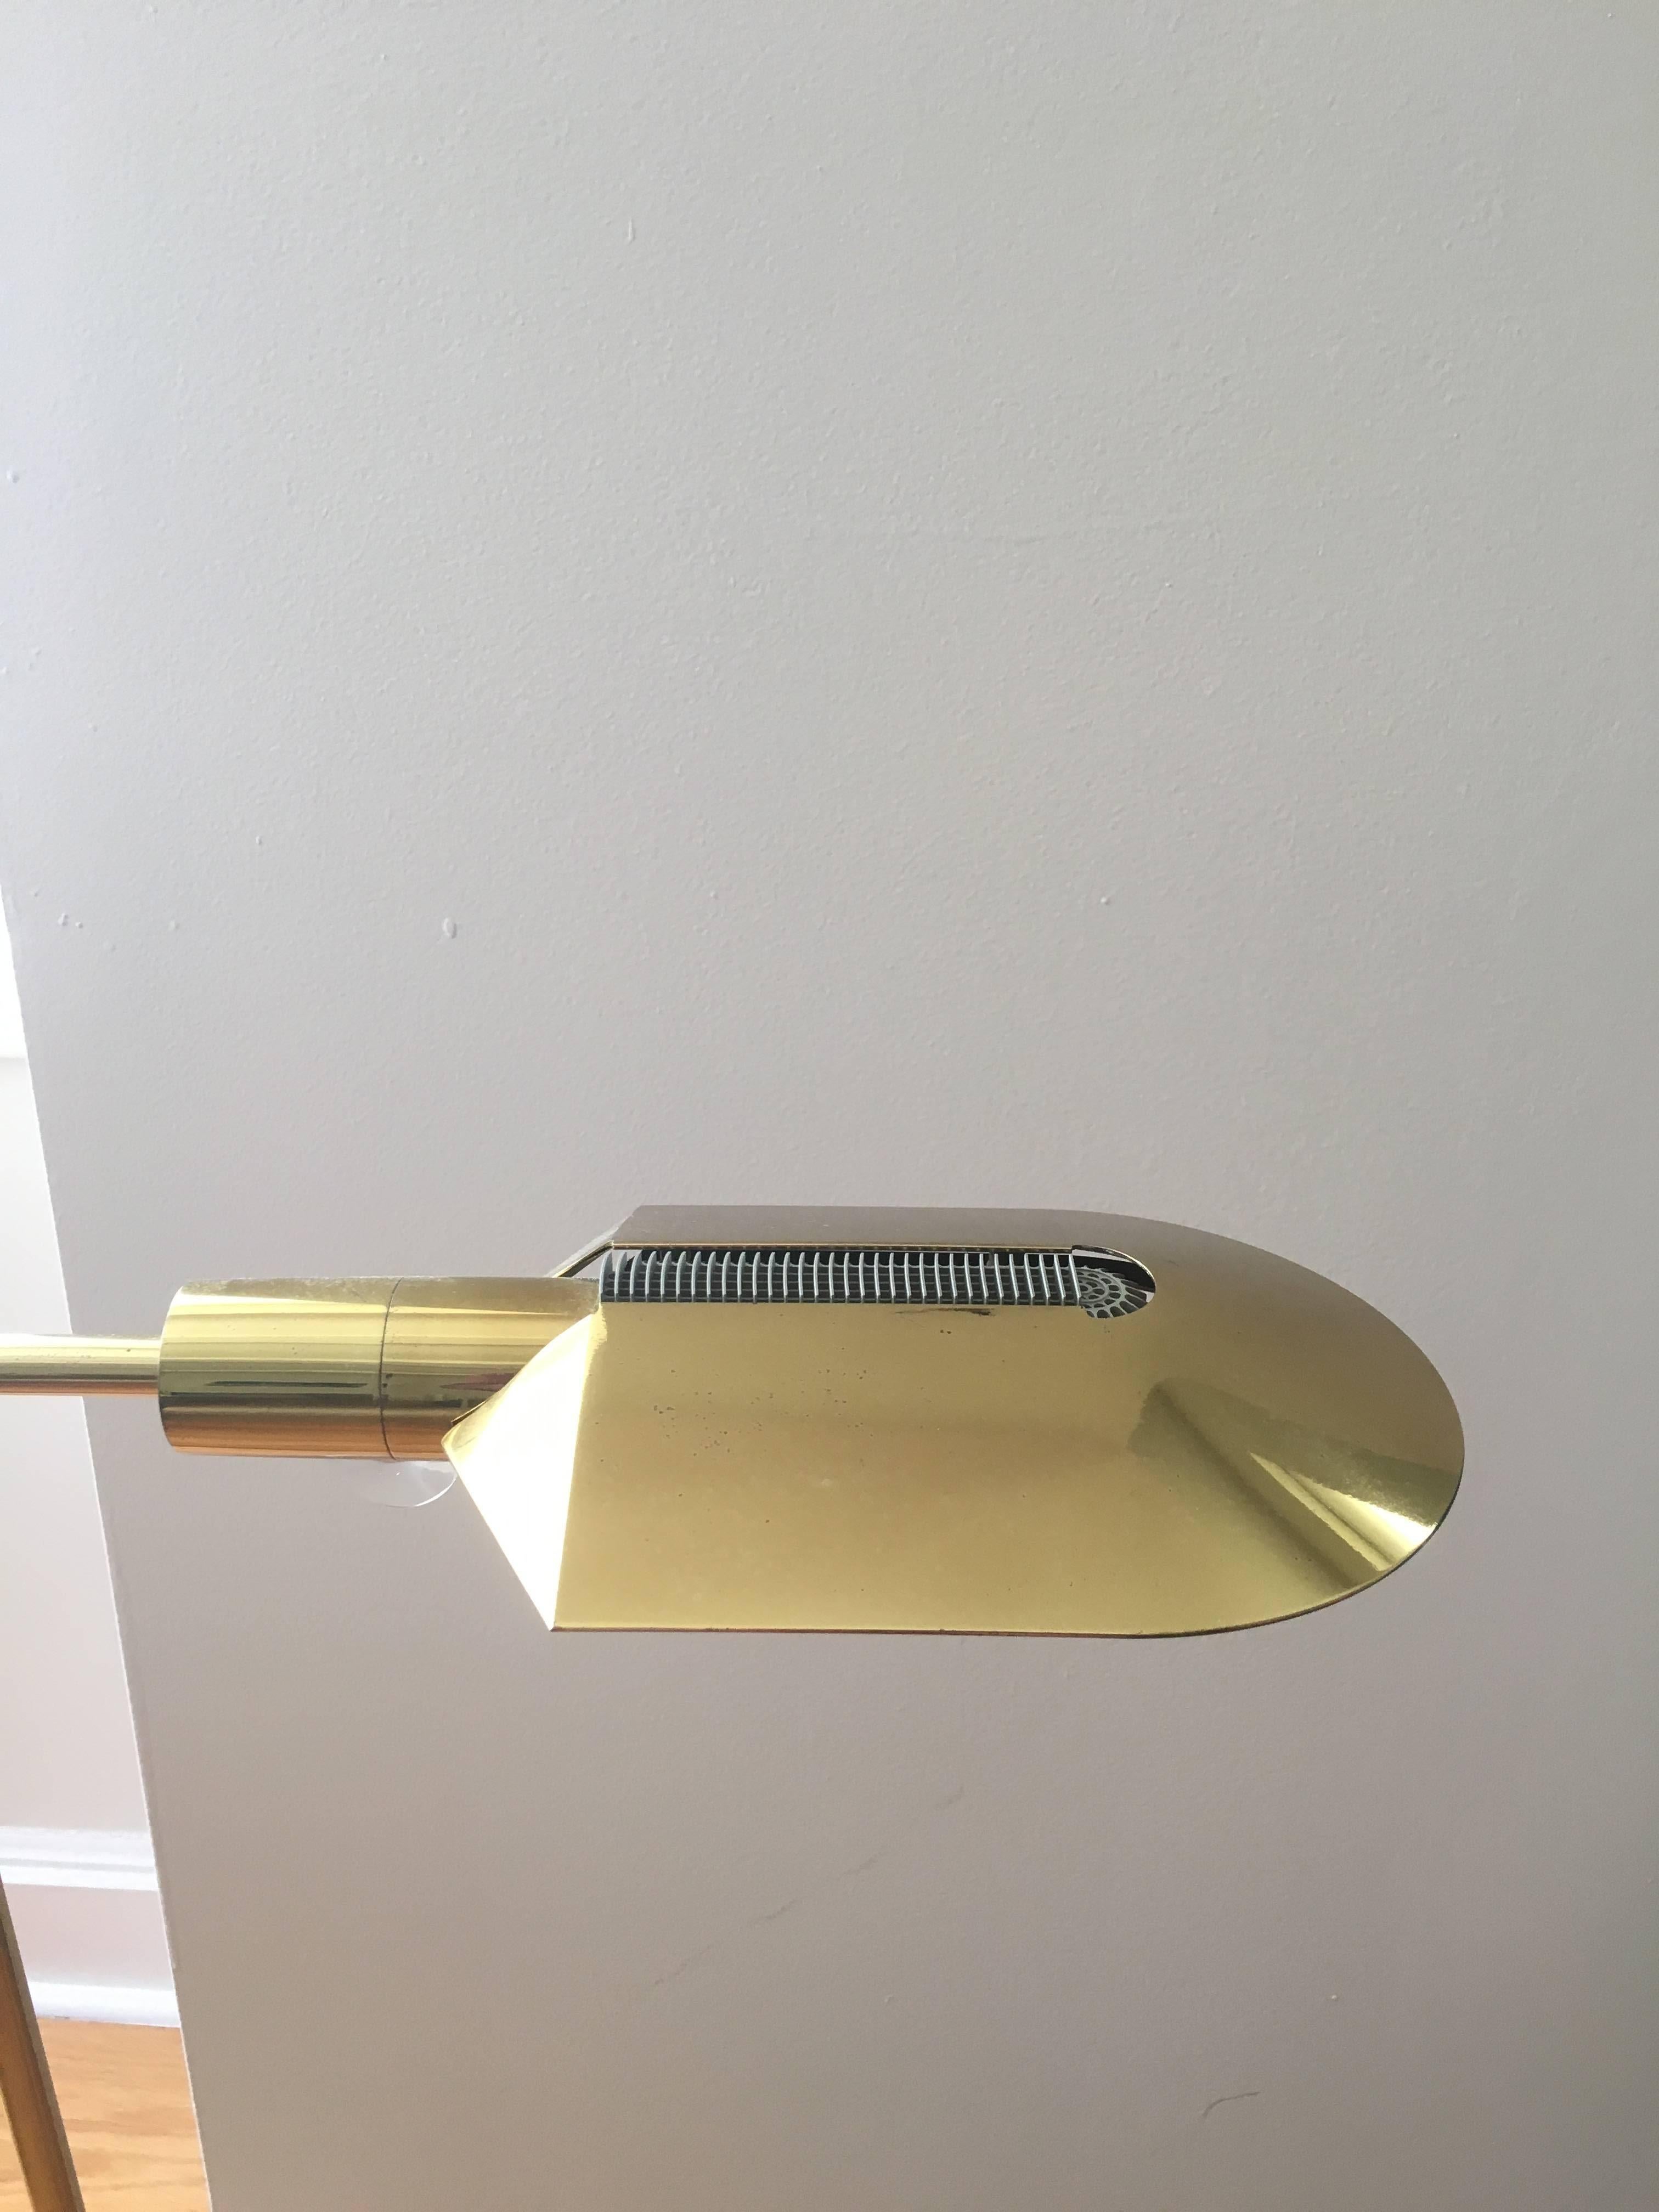 Cedric Hartman 1970's adjustable reading lamp of rare form; lacquered brass, galvanized steel, original lucite knob. Signed and stamped to the underside in steel.  

*Three available, priced individually. 

Provenance: Private Residence, East